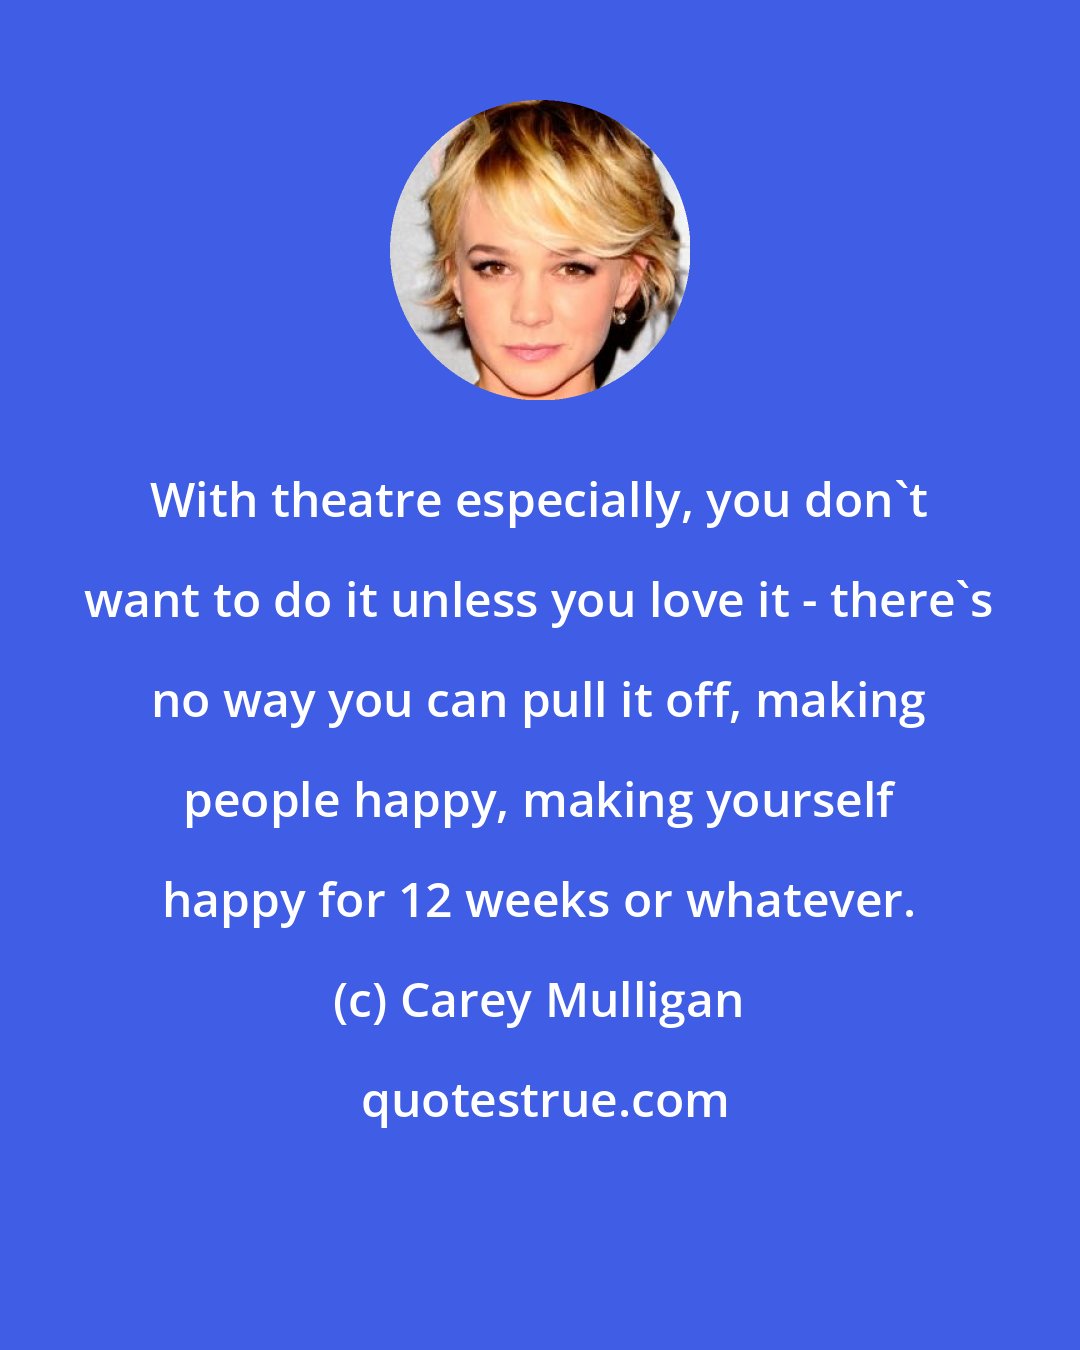 Carey Mulligan: With theatre especially, you don't want to do it unless you love it - there's no way you can pull it off, making people happy, making yourself happy for 12 weeks or whatever.